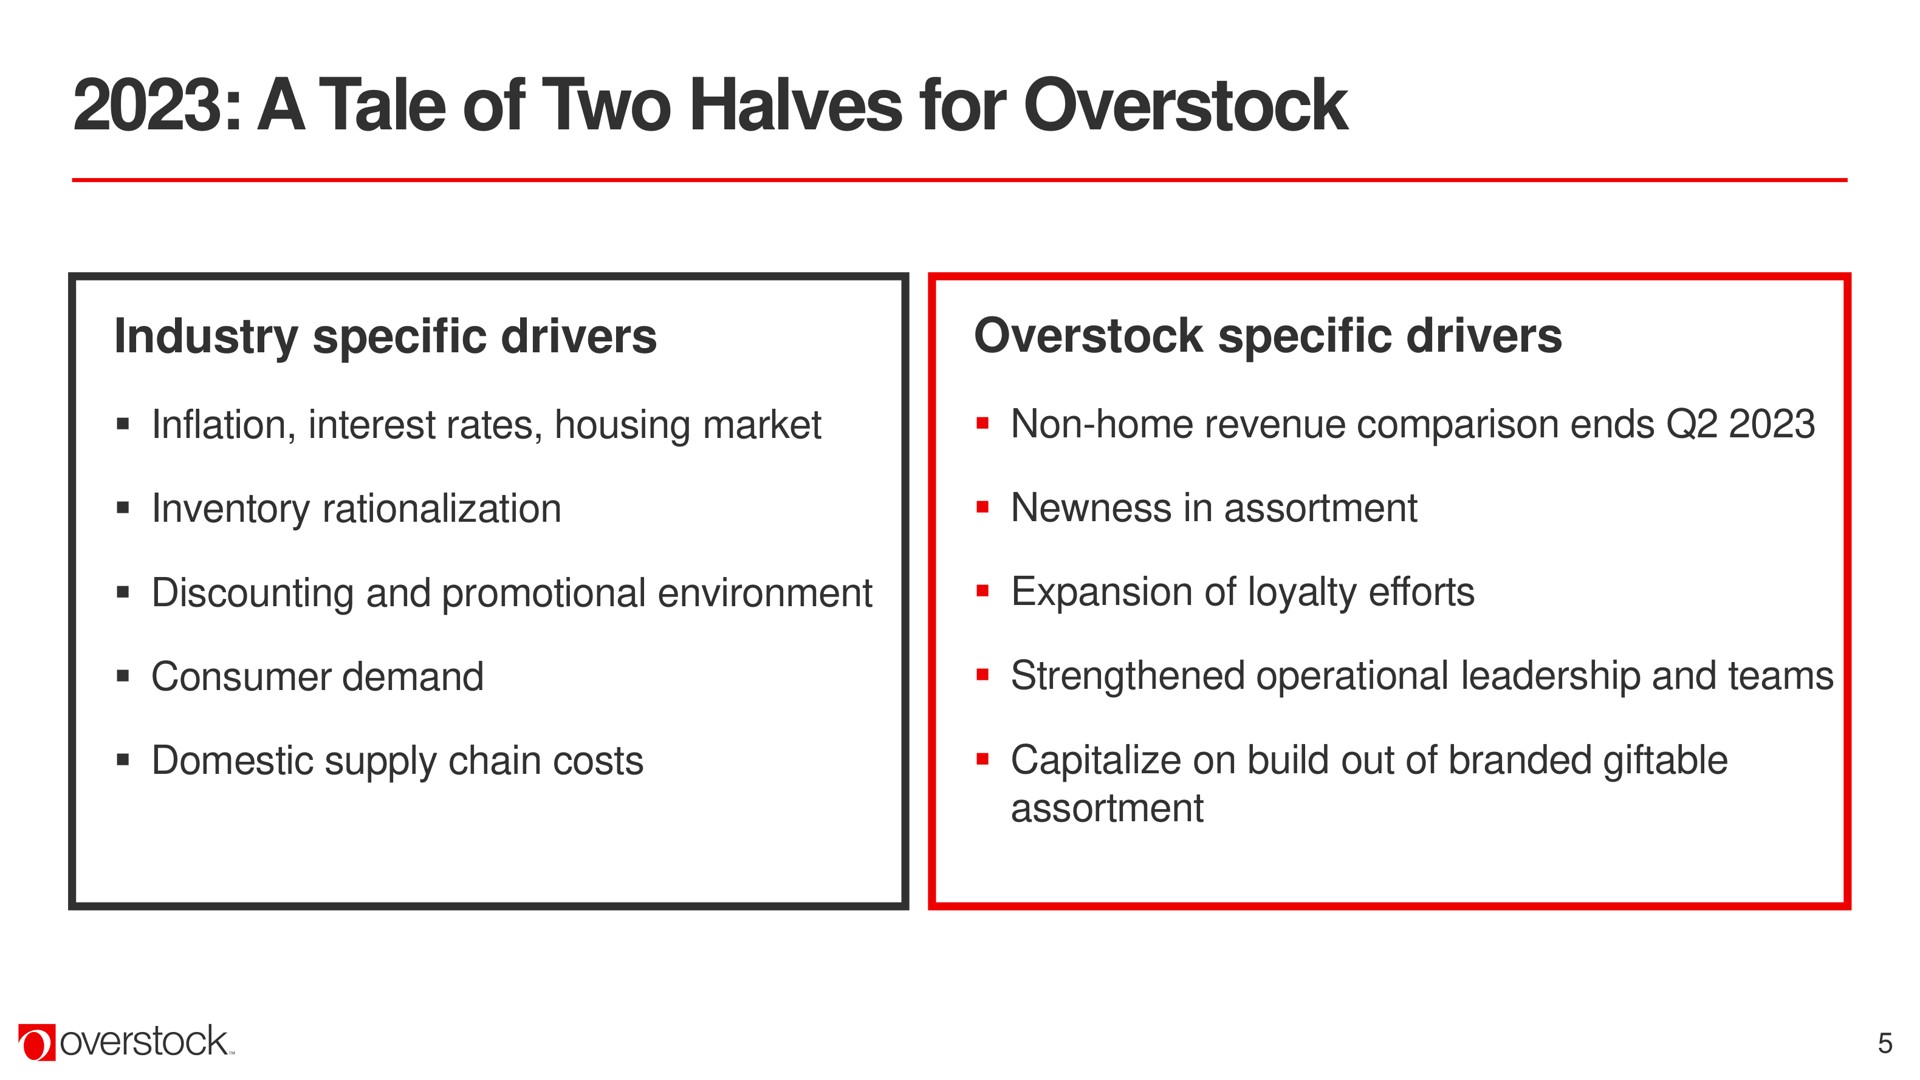 a tale of two halves for overstock | Overstock